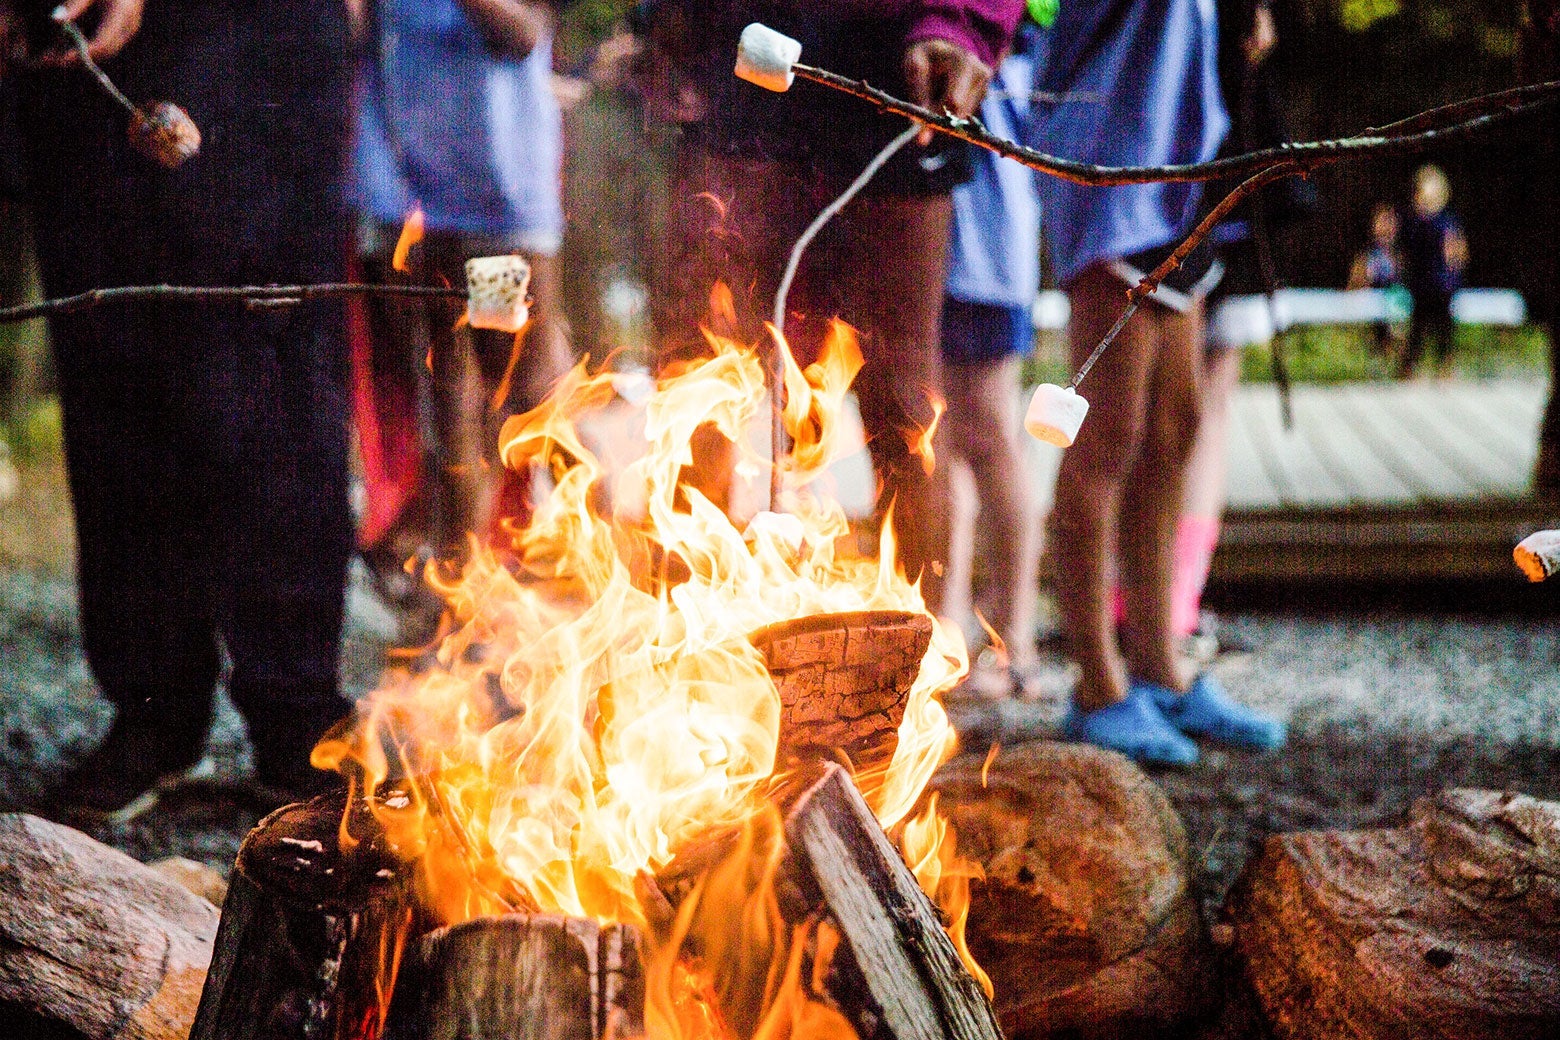 People hold marshmallows on sticks above a campfire.